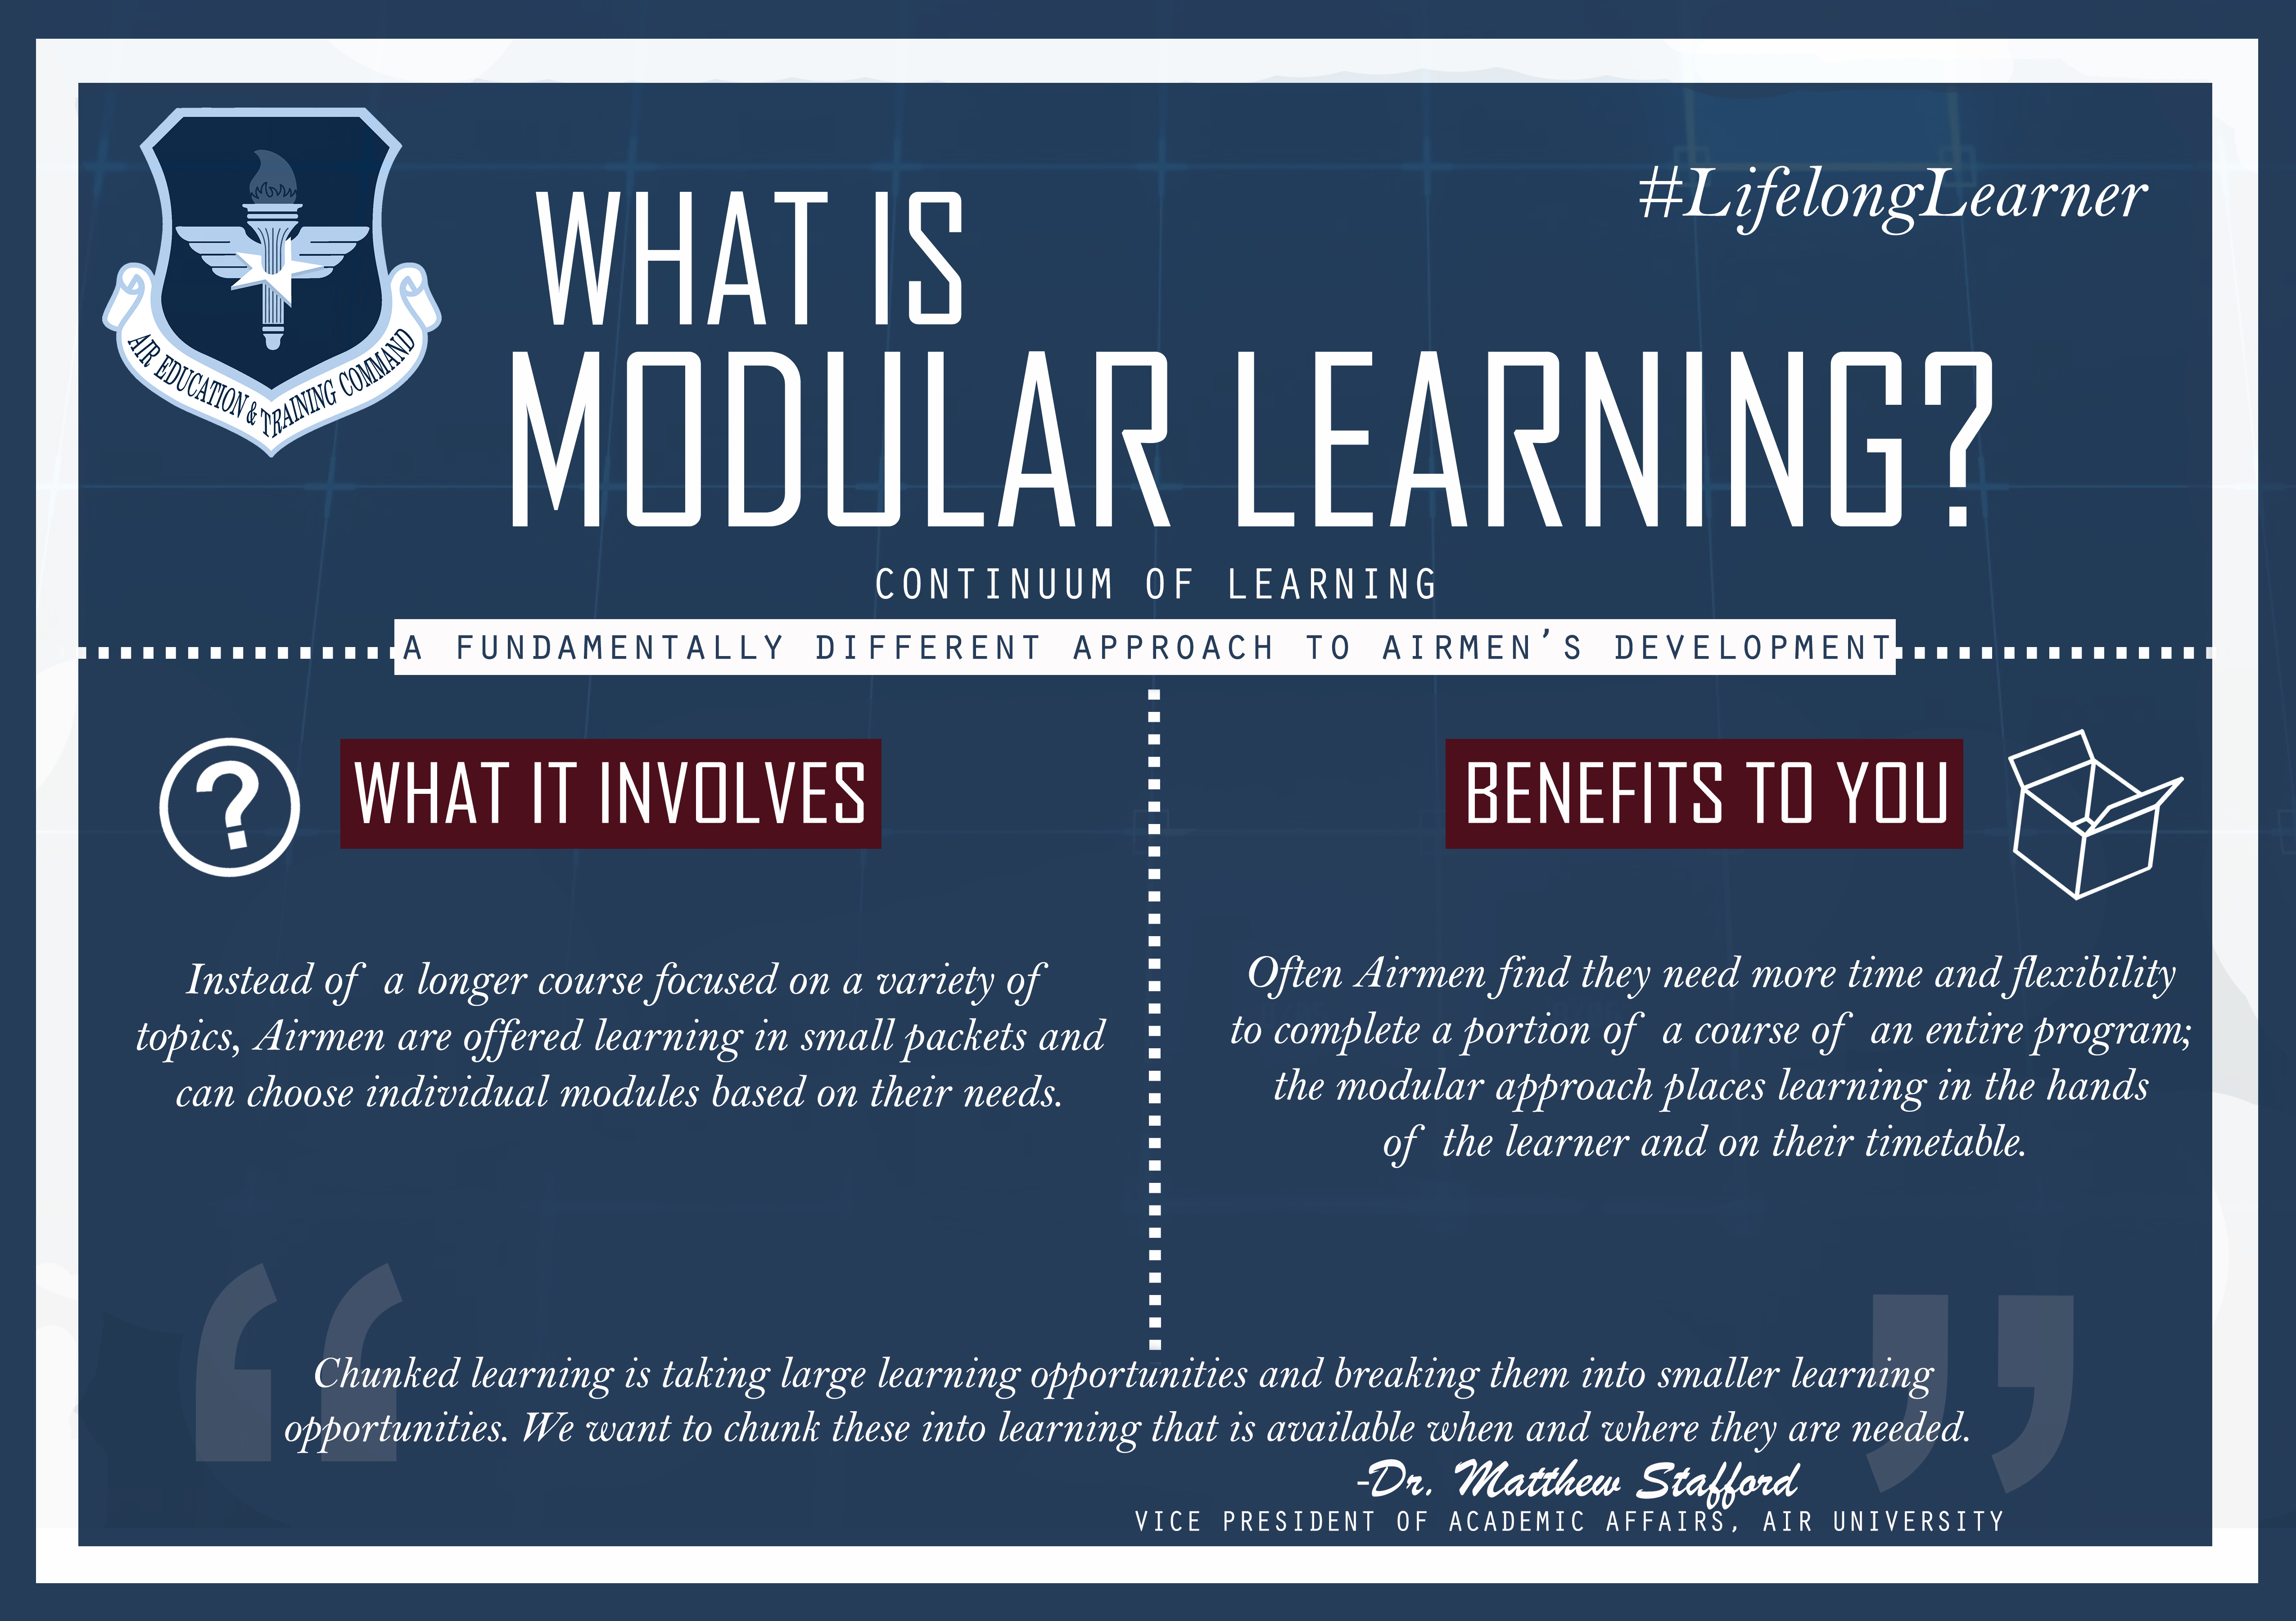 Continuum of Learning: Modular Learning